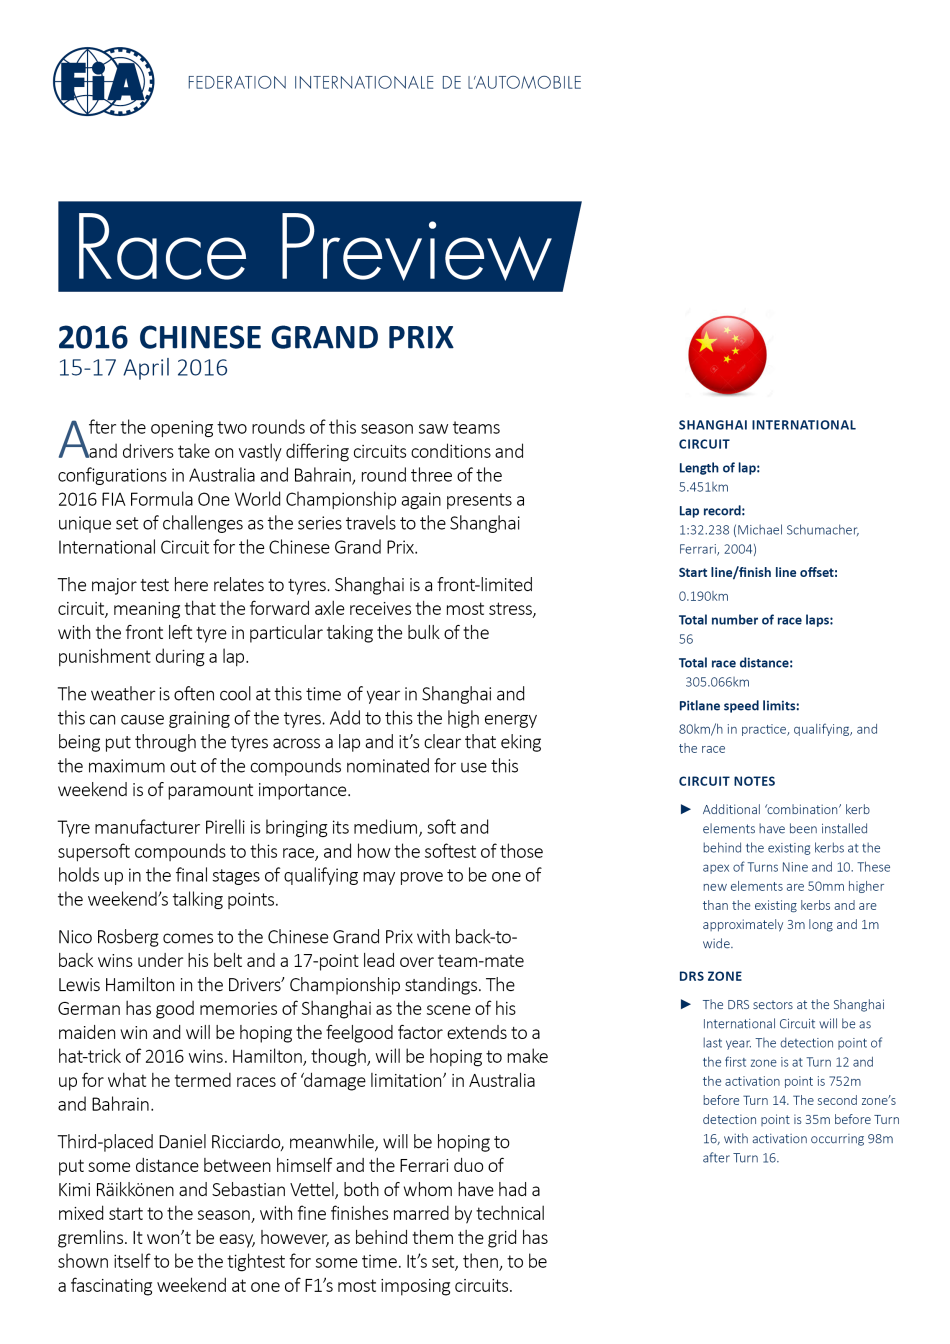 F1 2016 Chinese Grand Prix Preview